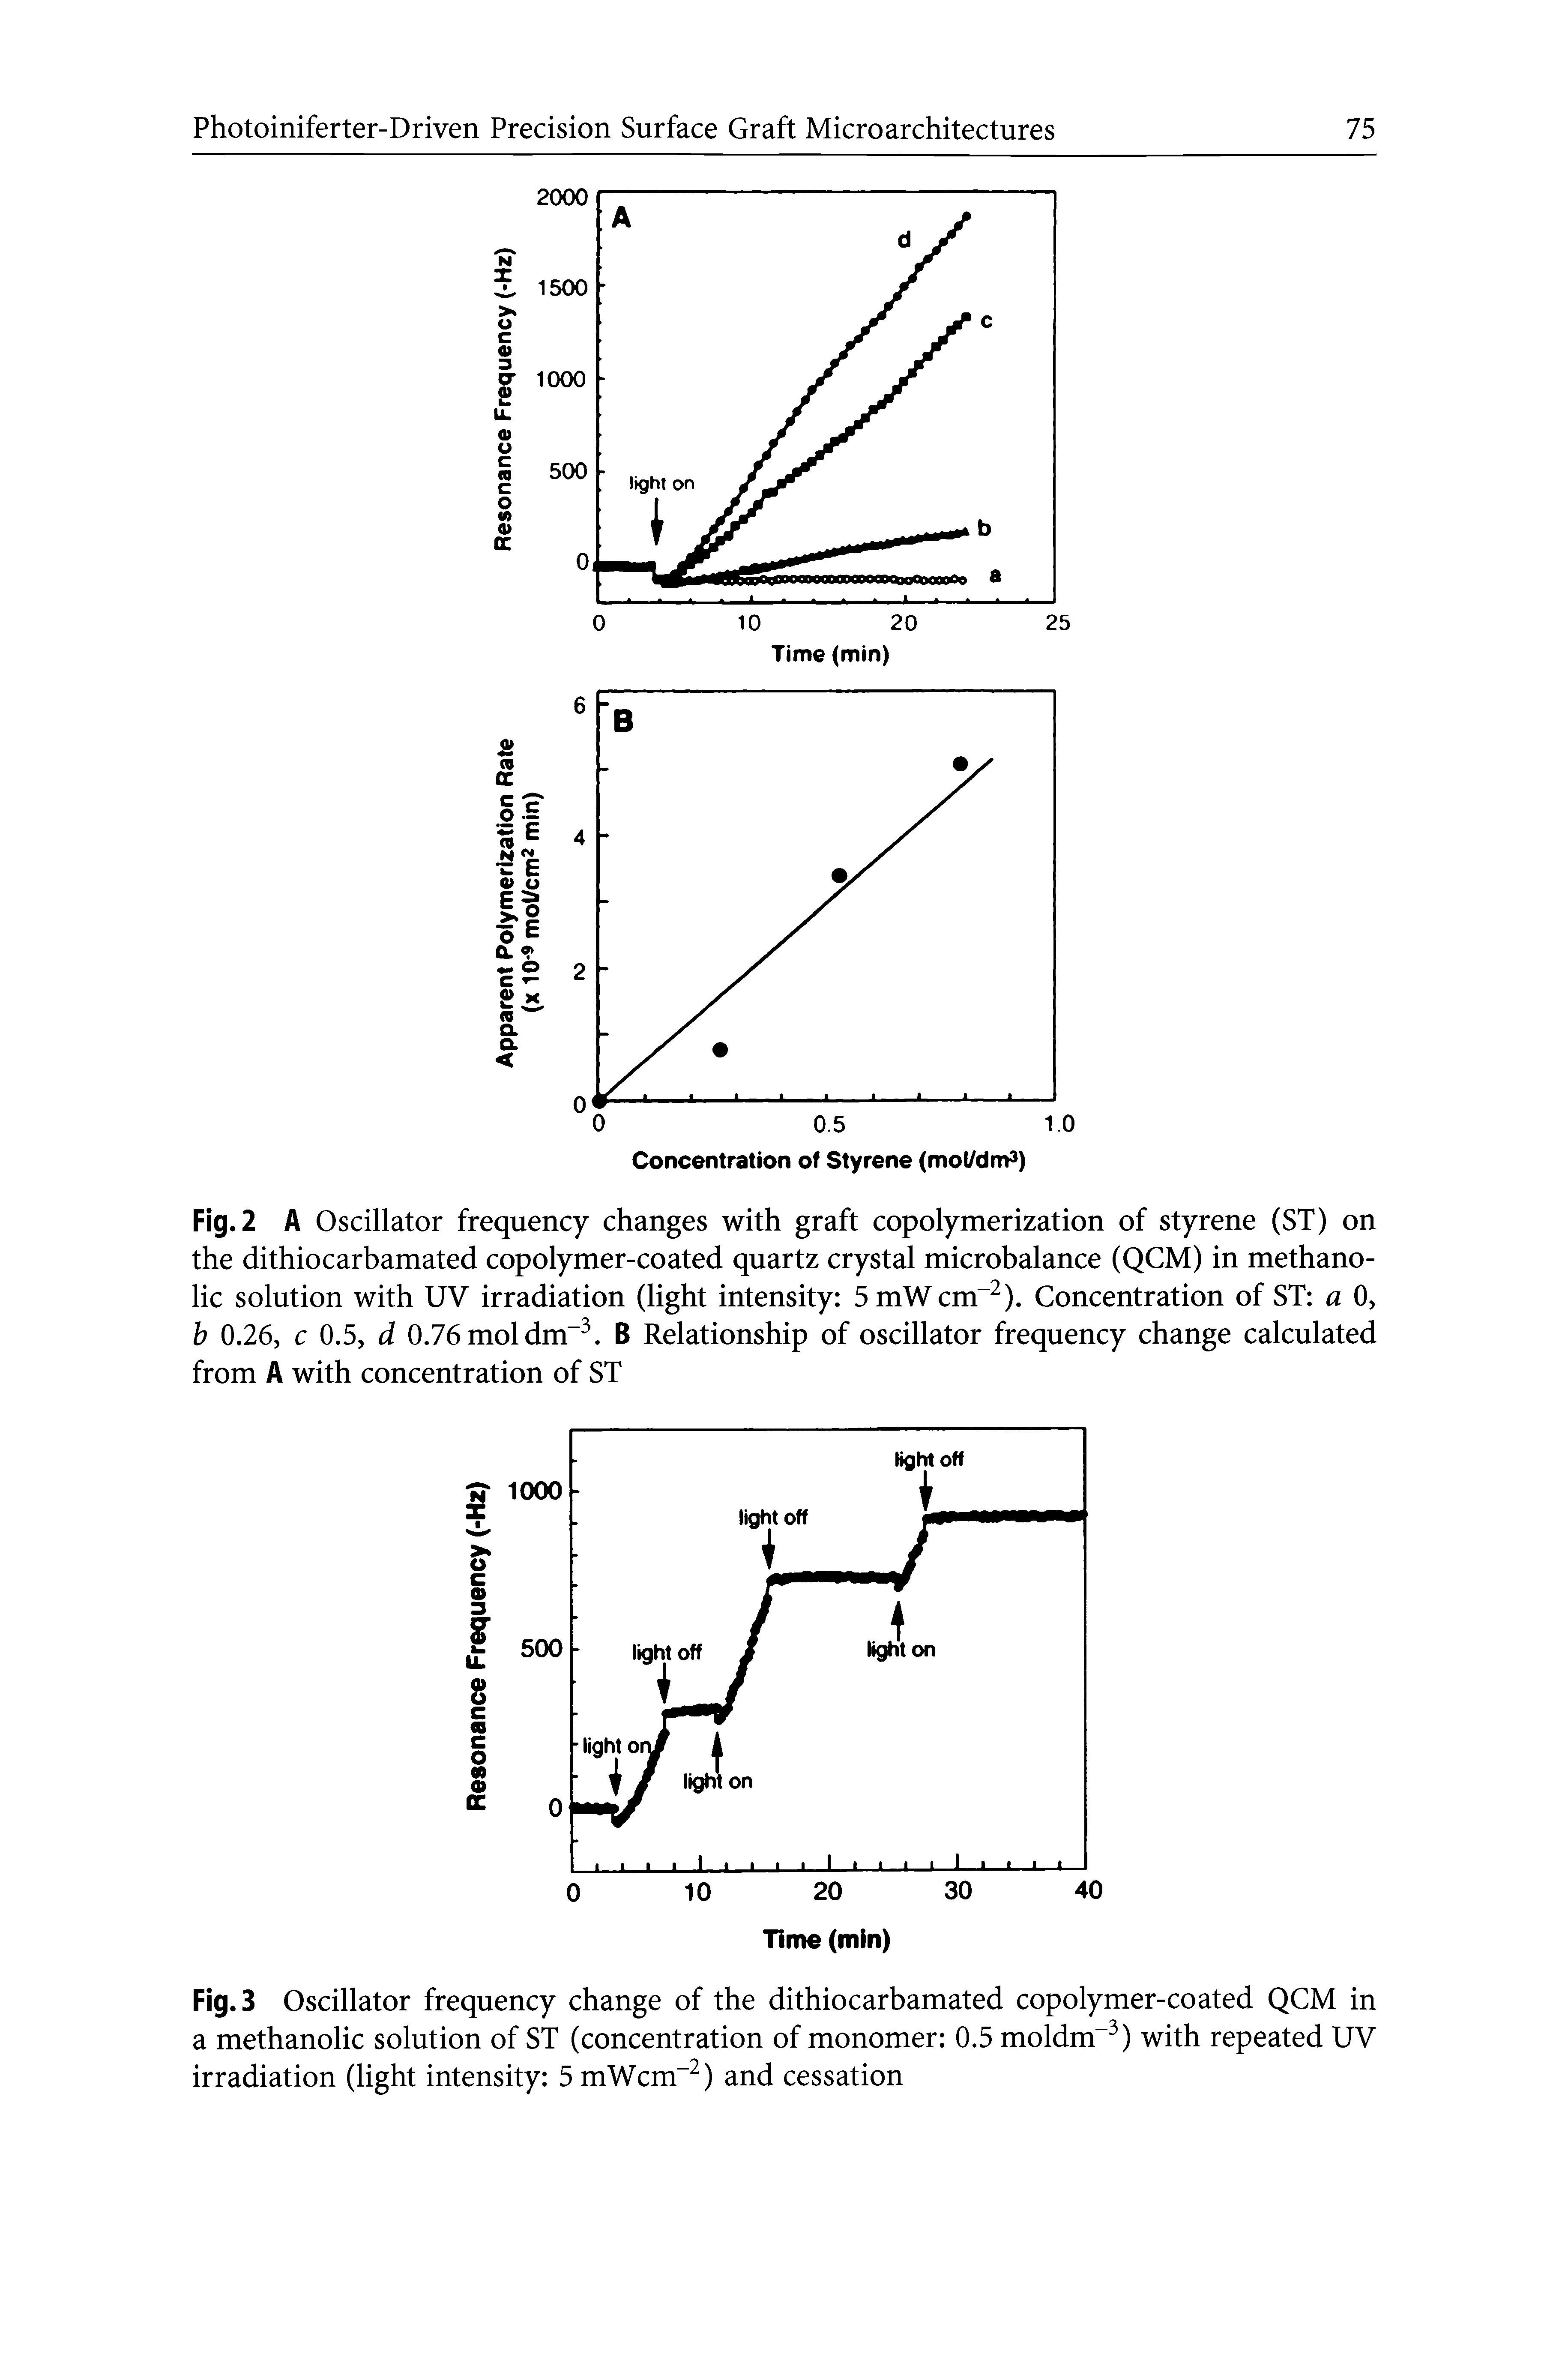 Fig. 2 A Oscillator frequency changes with graft copolymerization of styrene (ST) on the dithiocarbamated copolymer-coated quartz crystal microbalance (QCM) in methano-lic solution with UV irradiation (light intensity 5mWcm ). Concentration of ST a 0, h 0.26, c 0.5, d 0.76 mol dm . B Relationship of oscillator frequency change calculated from A with concentration of ST...